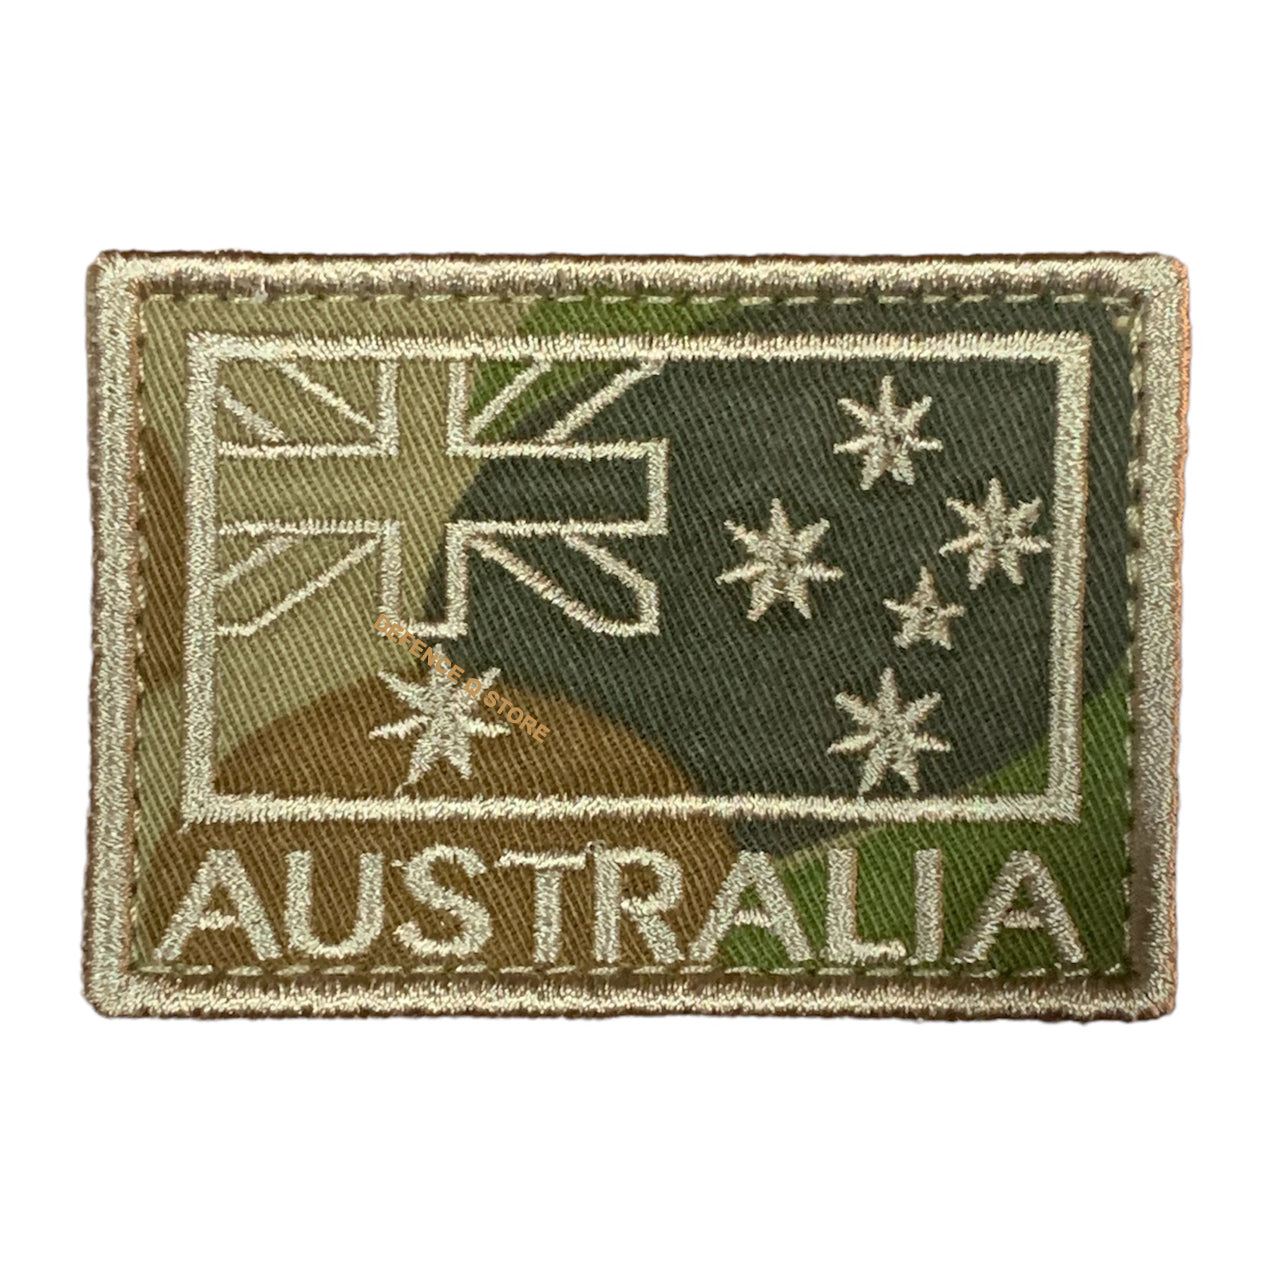 Add a touch of charm to your attire with this Subdued Embroidery Velcro Backed Patch Auscam, featuring the iconic Australian National Flag. Measuring 5cm X 7cm, it is the perfect addition to your jacket, pack or cap. Show your love for your country in a stylish and patriotic way! www.defenceqstore.com.au